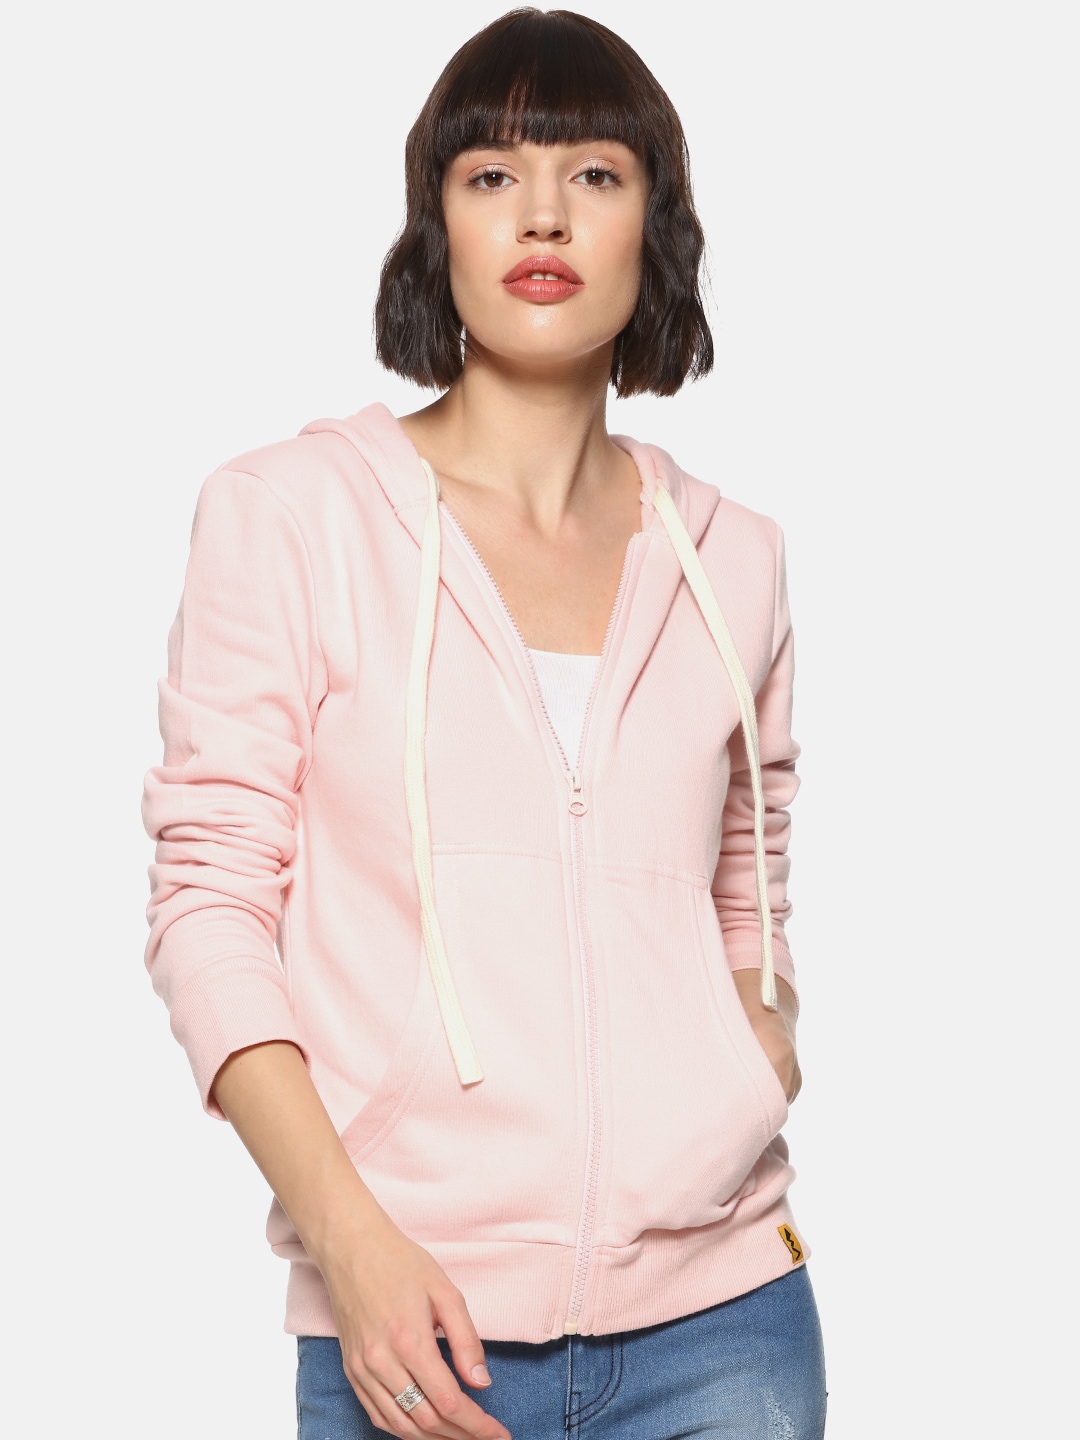 Campus Sutra Women Pink Solid Hooded Sweatshirt Price in India